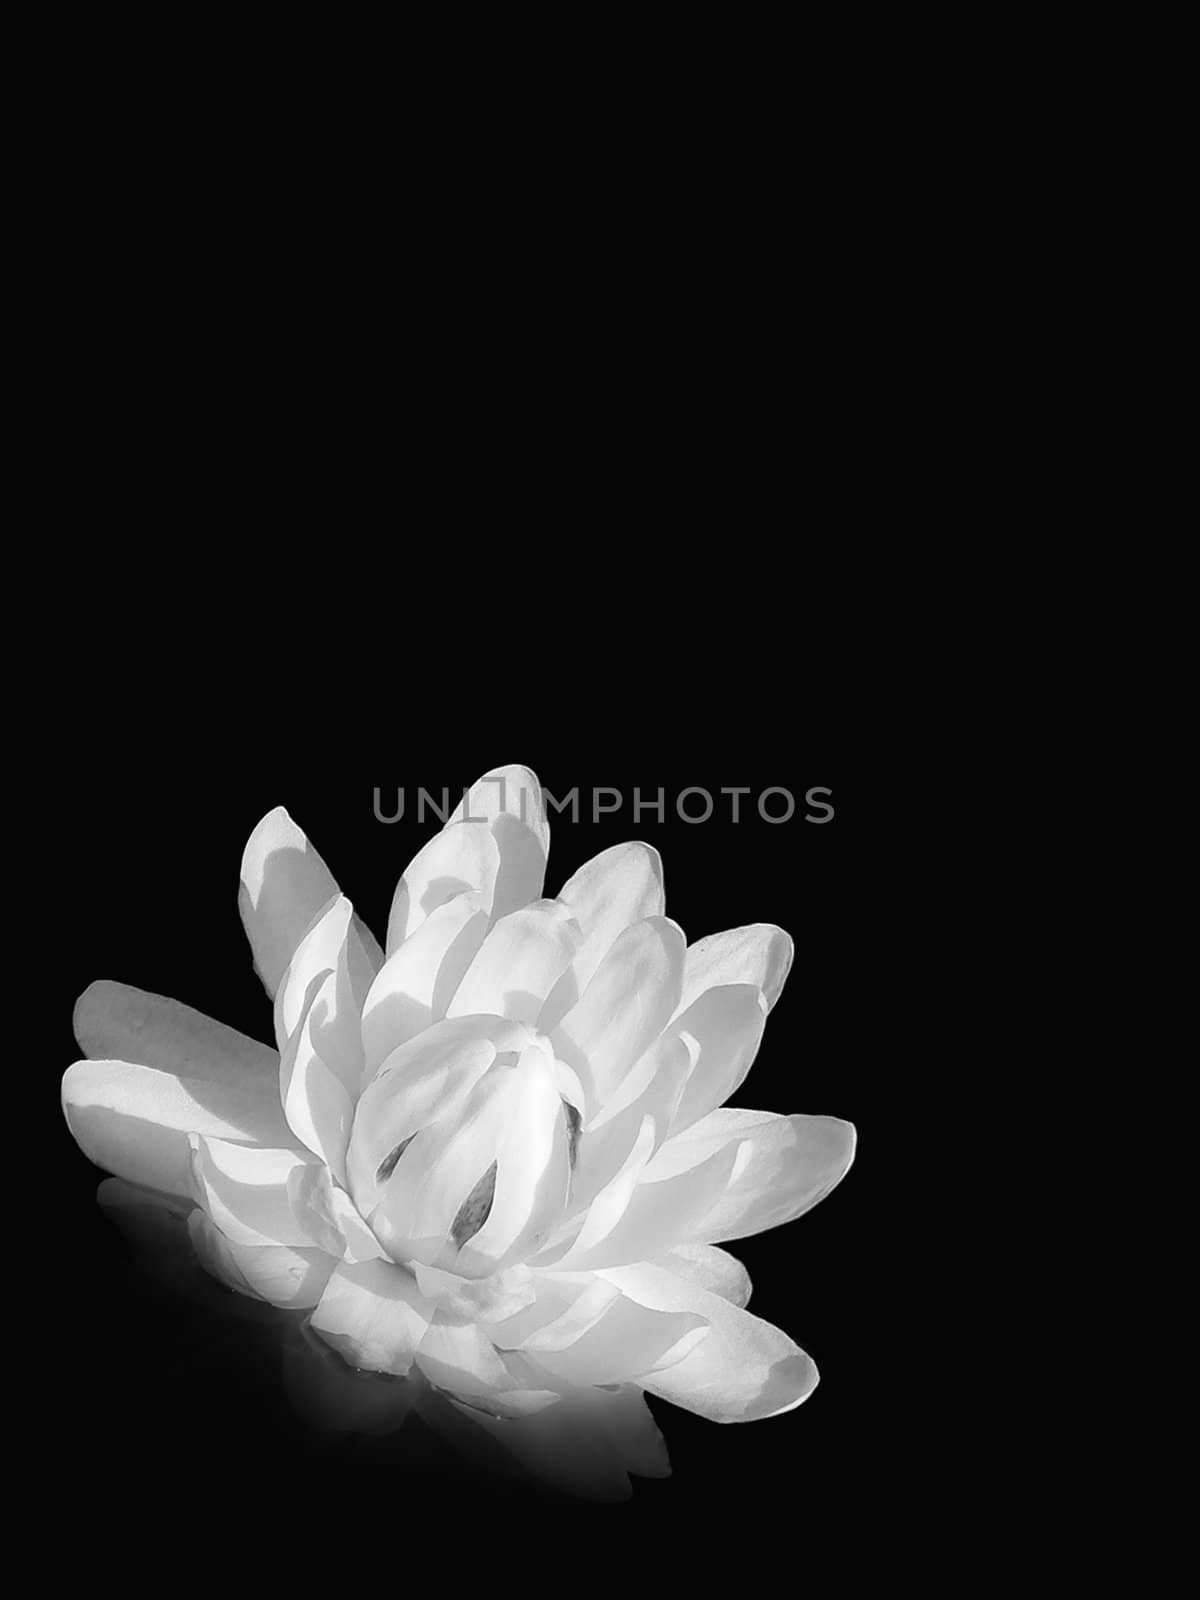 Lilly - black and white by Joankakrak